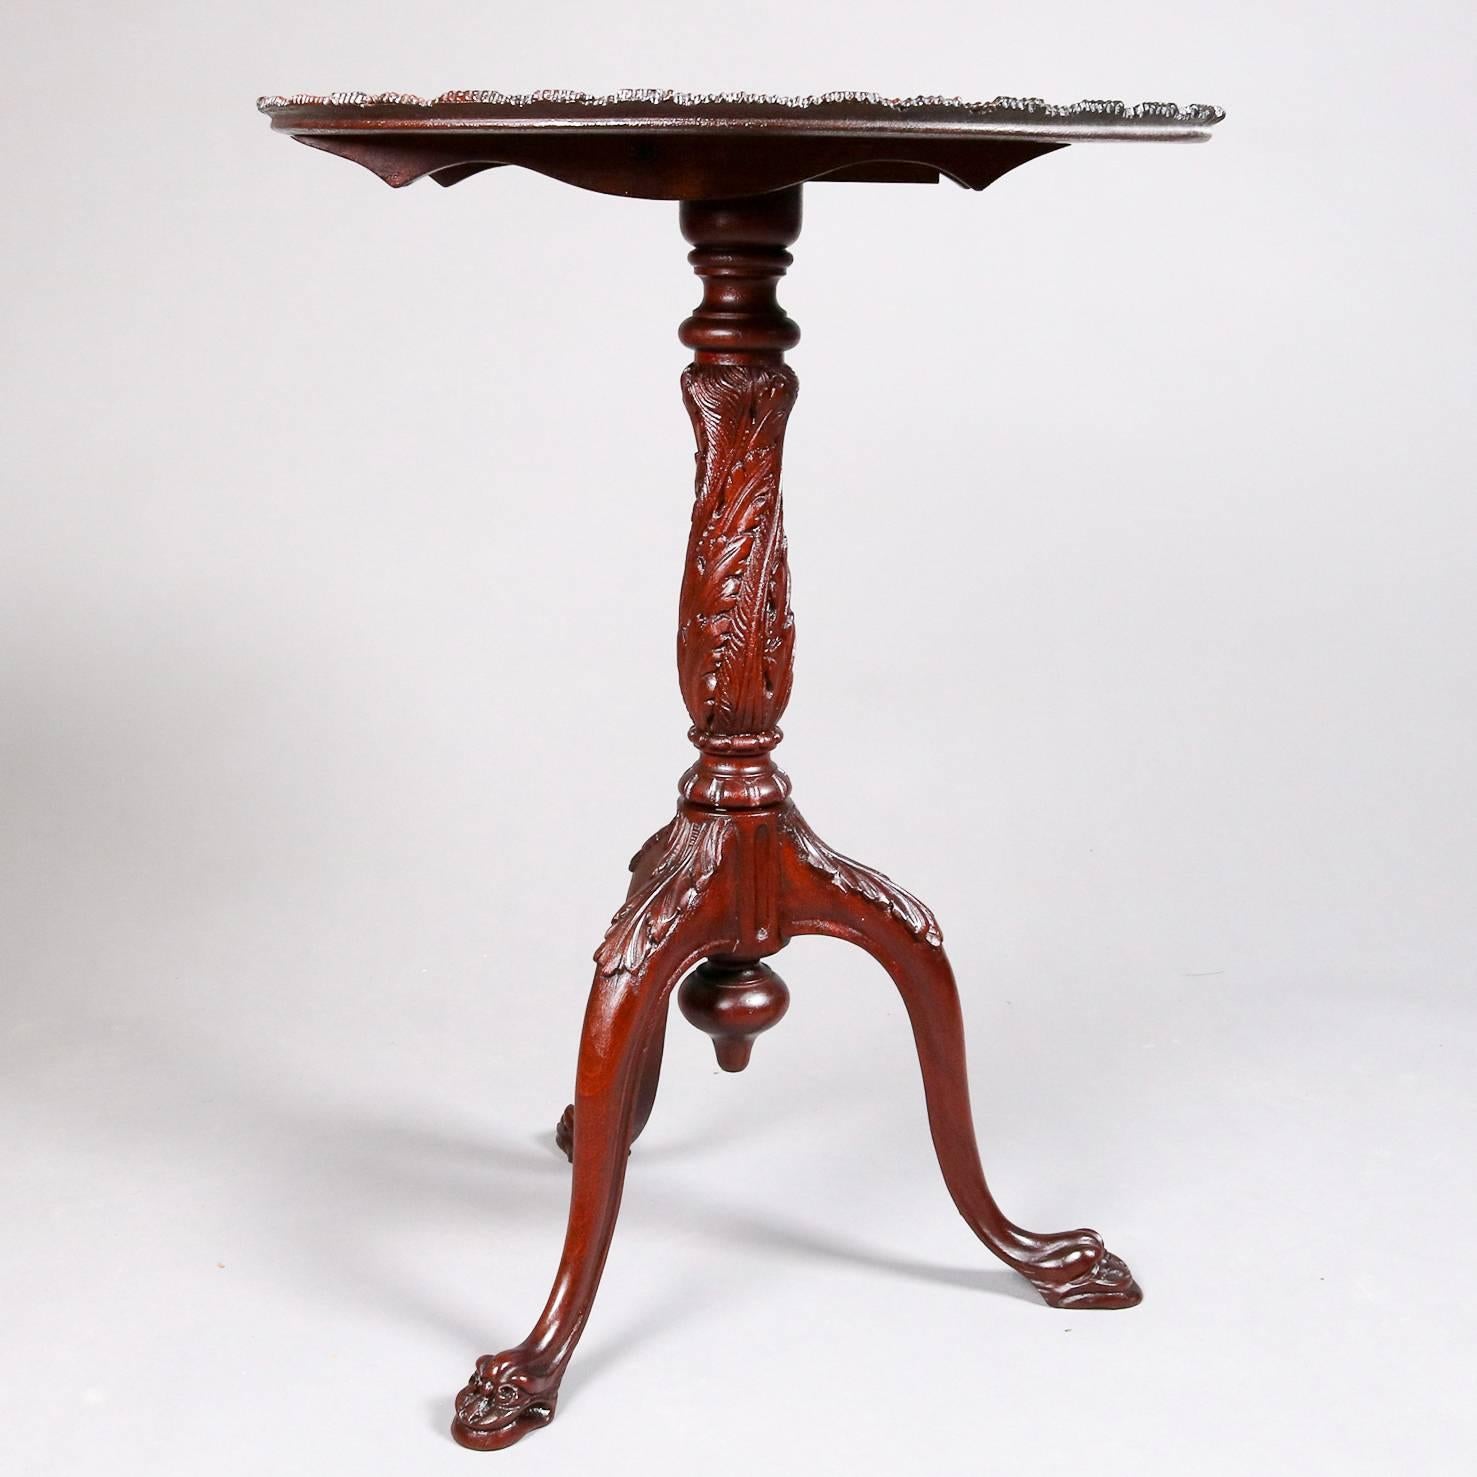 Antique mahogany tilt top table features carved pie crust top with central rosette, acanthus decorated plinth and tripod cabriole legs terminating in figural feet with central drop finial, 19th century

Measures - tilt: 42" H, 30" H x